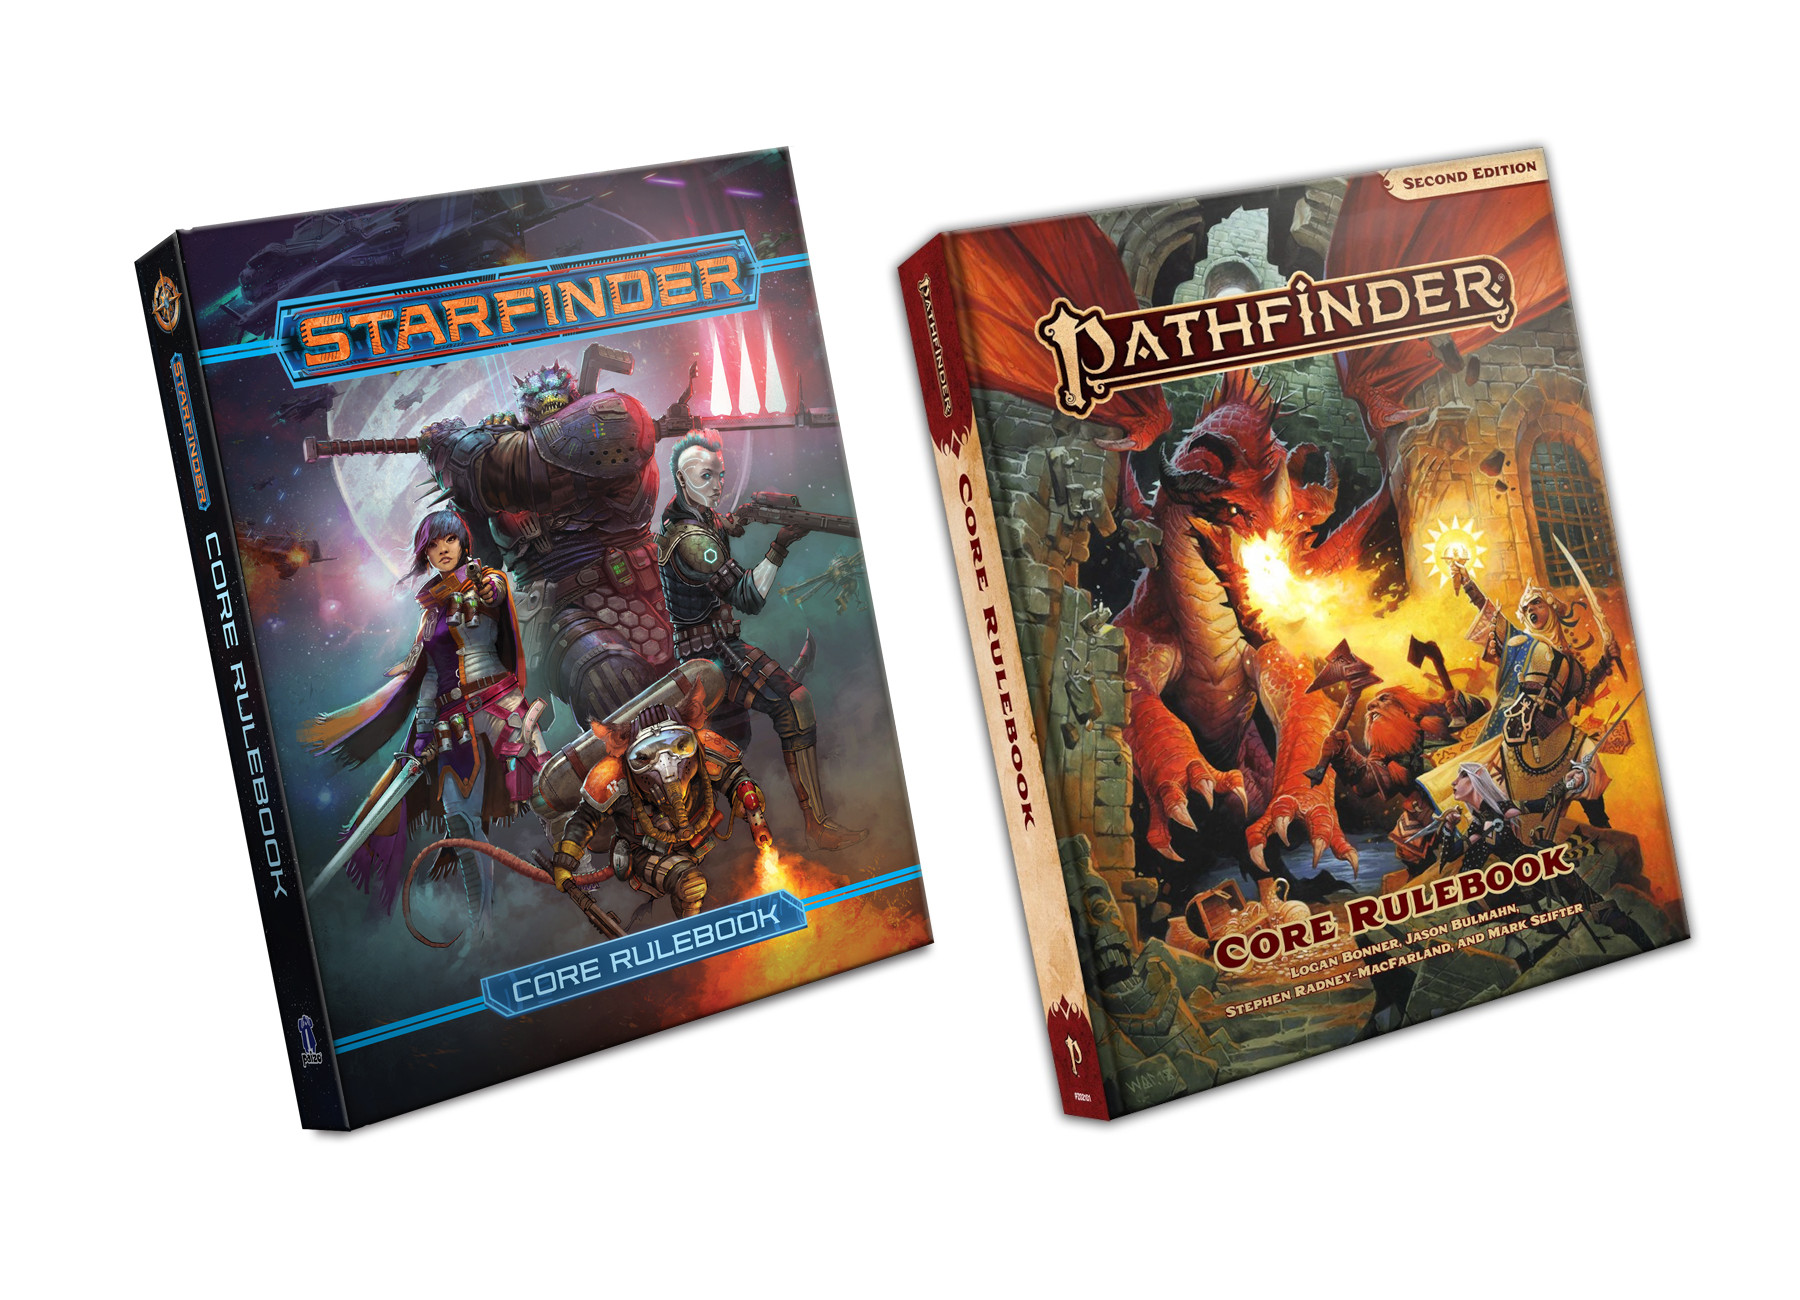 Pathfinder Second Edition Core Rulebook and Starfinder Core Rulebook Digital CD Key (12.58$)